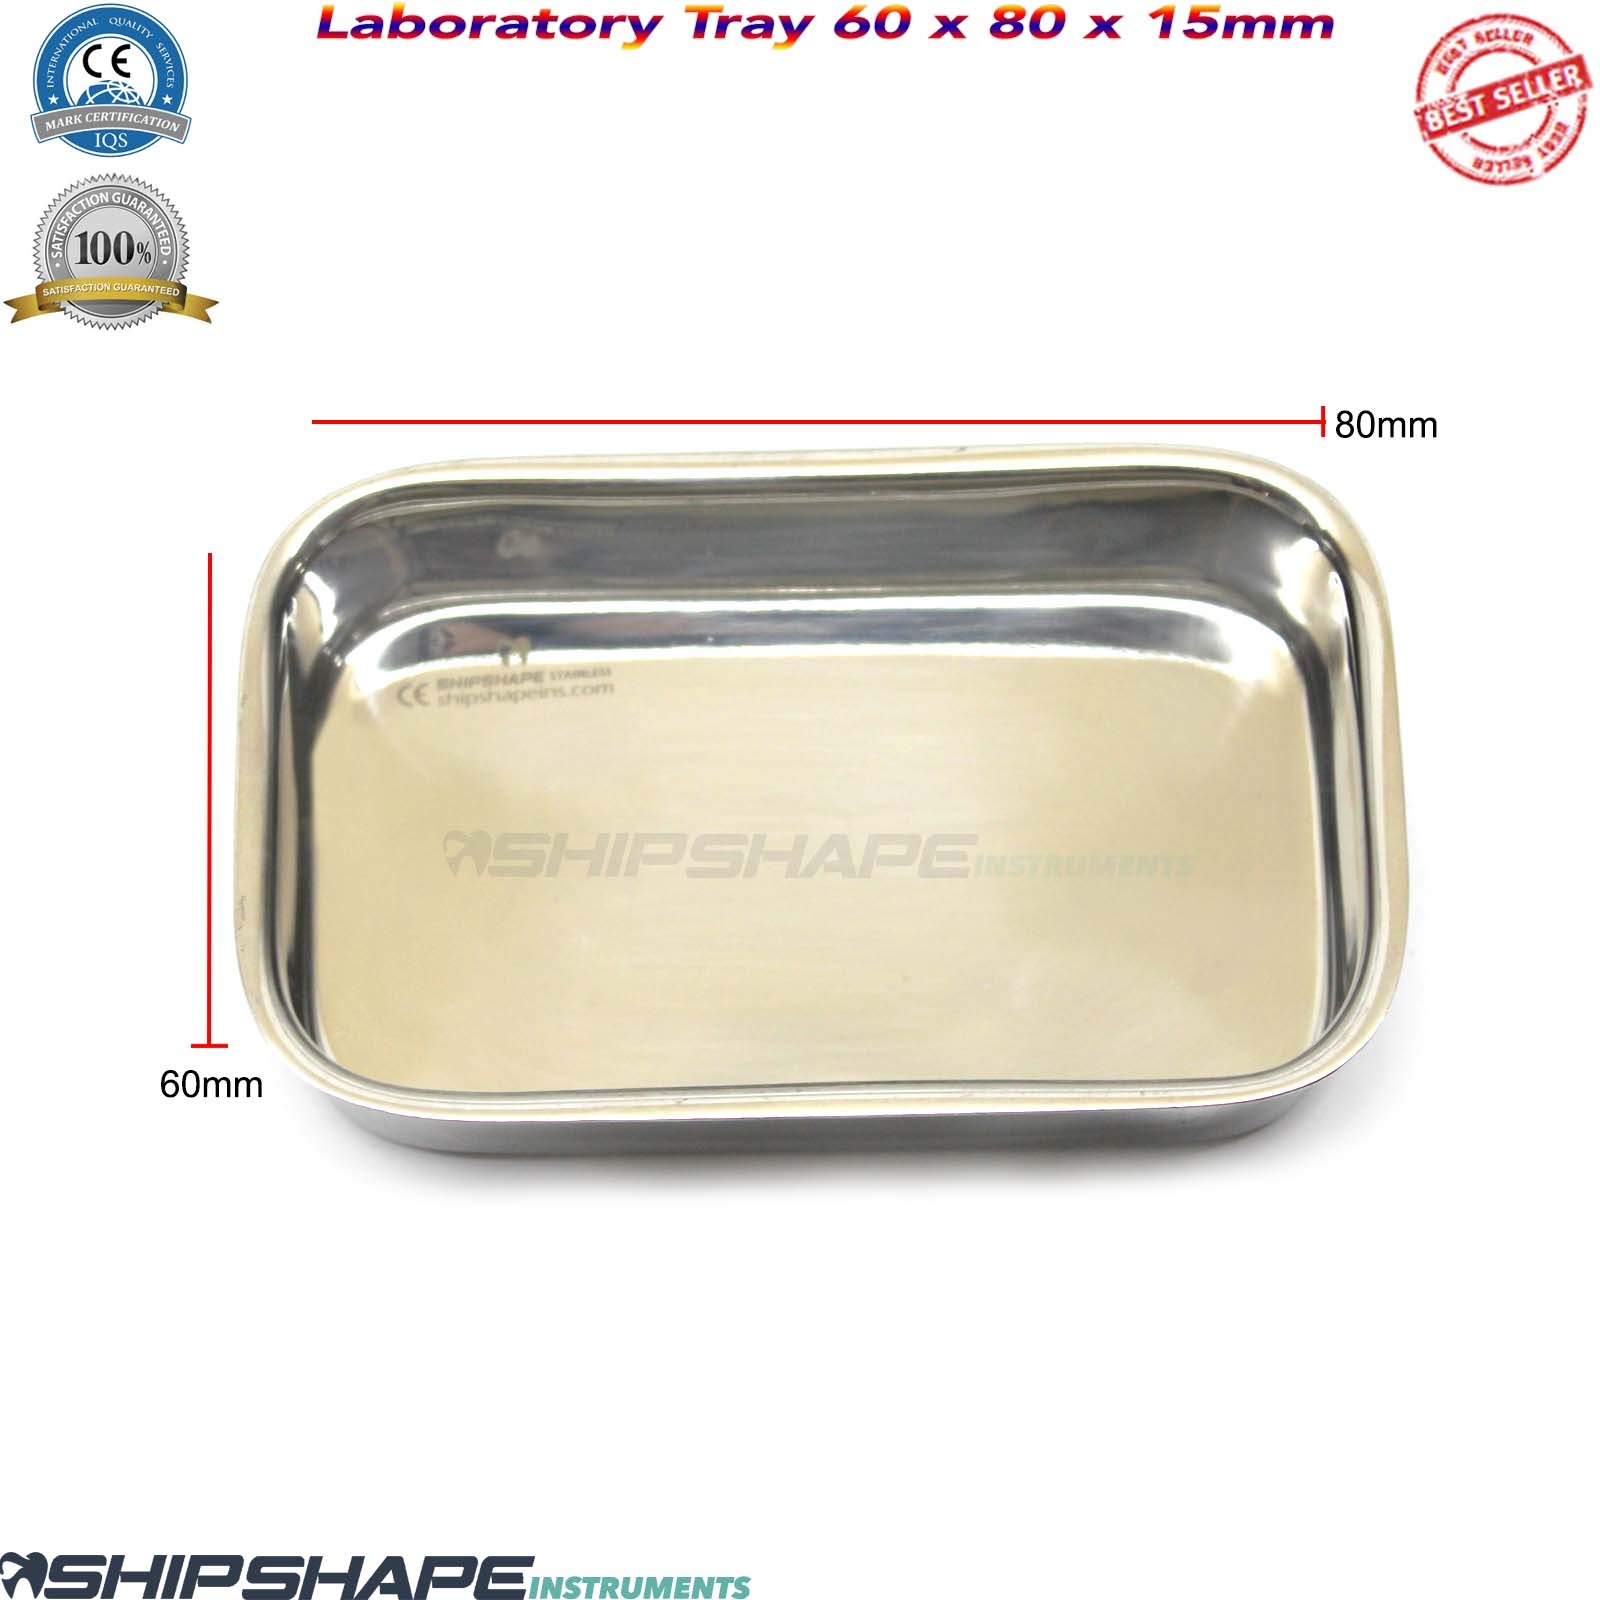 Medical Stainless Steel Instrument Tray Laboratory Instrument Dental Tool 60 x 70 x 15mm-0